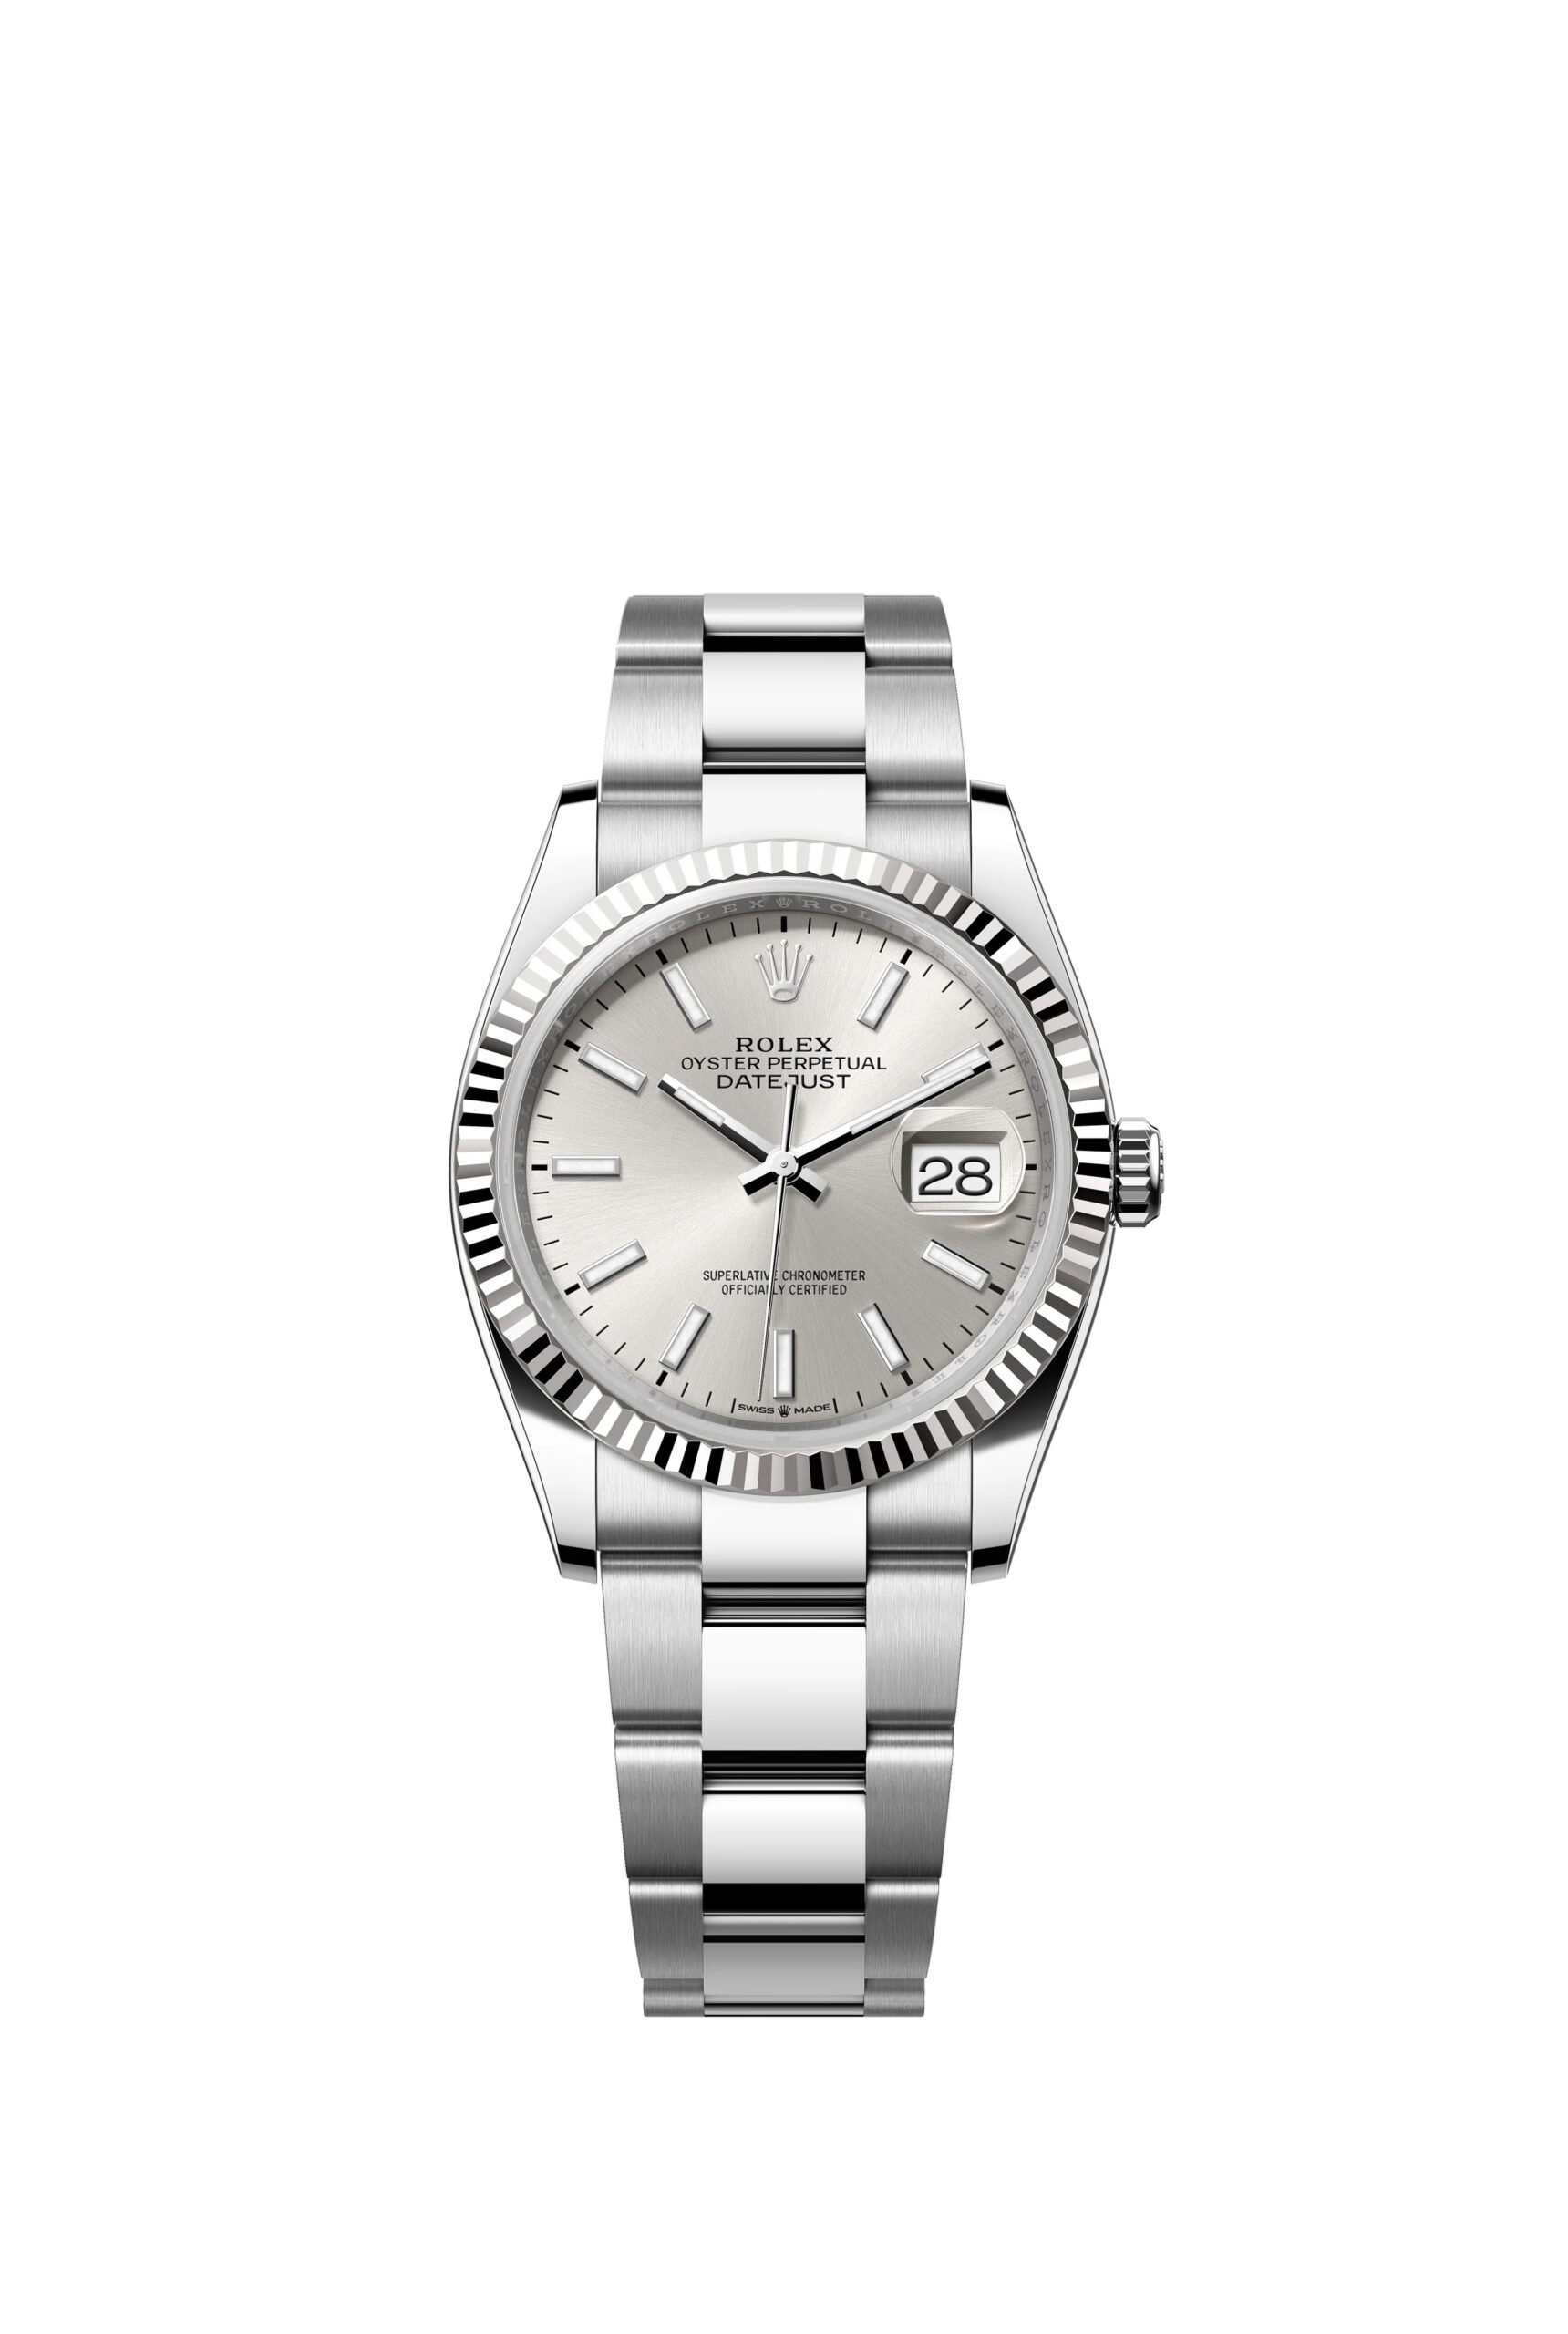 Rolex Datejust 36 Oyster, 36 mm, Oystersteel and white gord Reference 126234